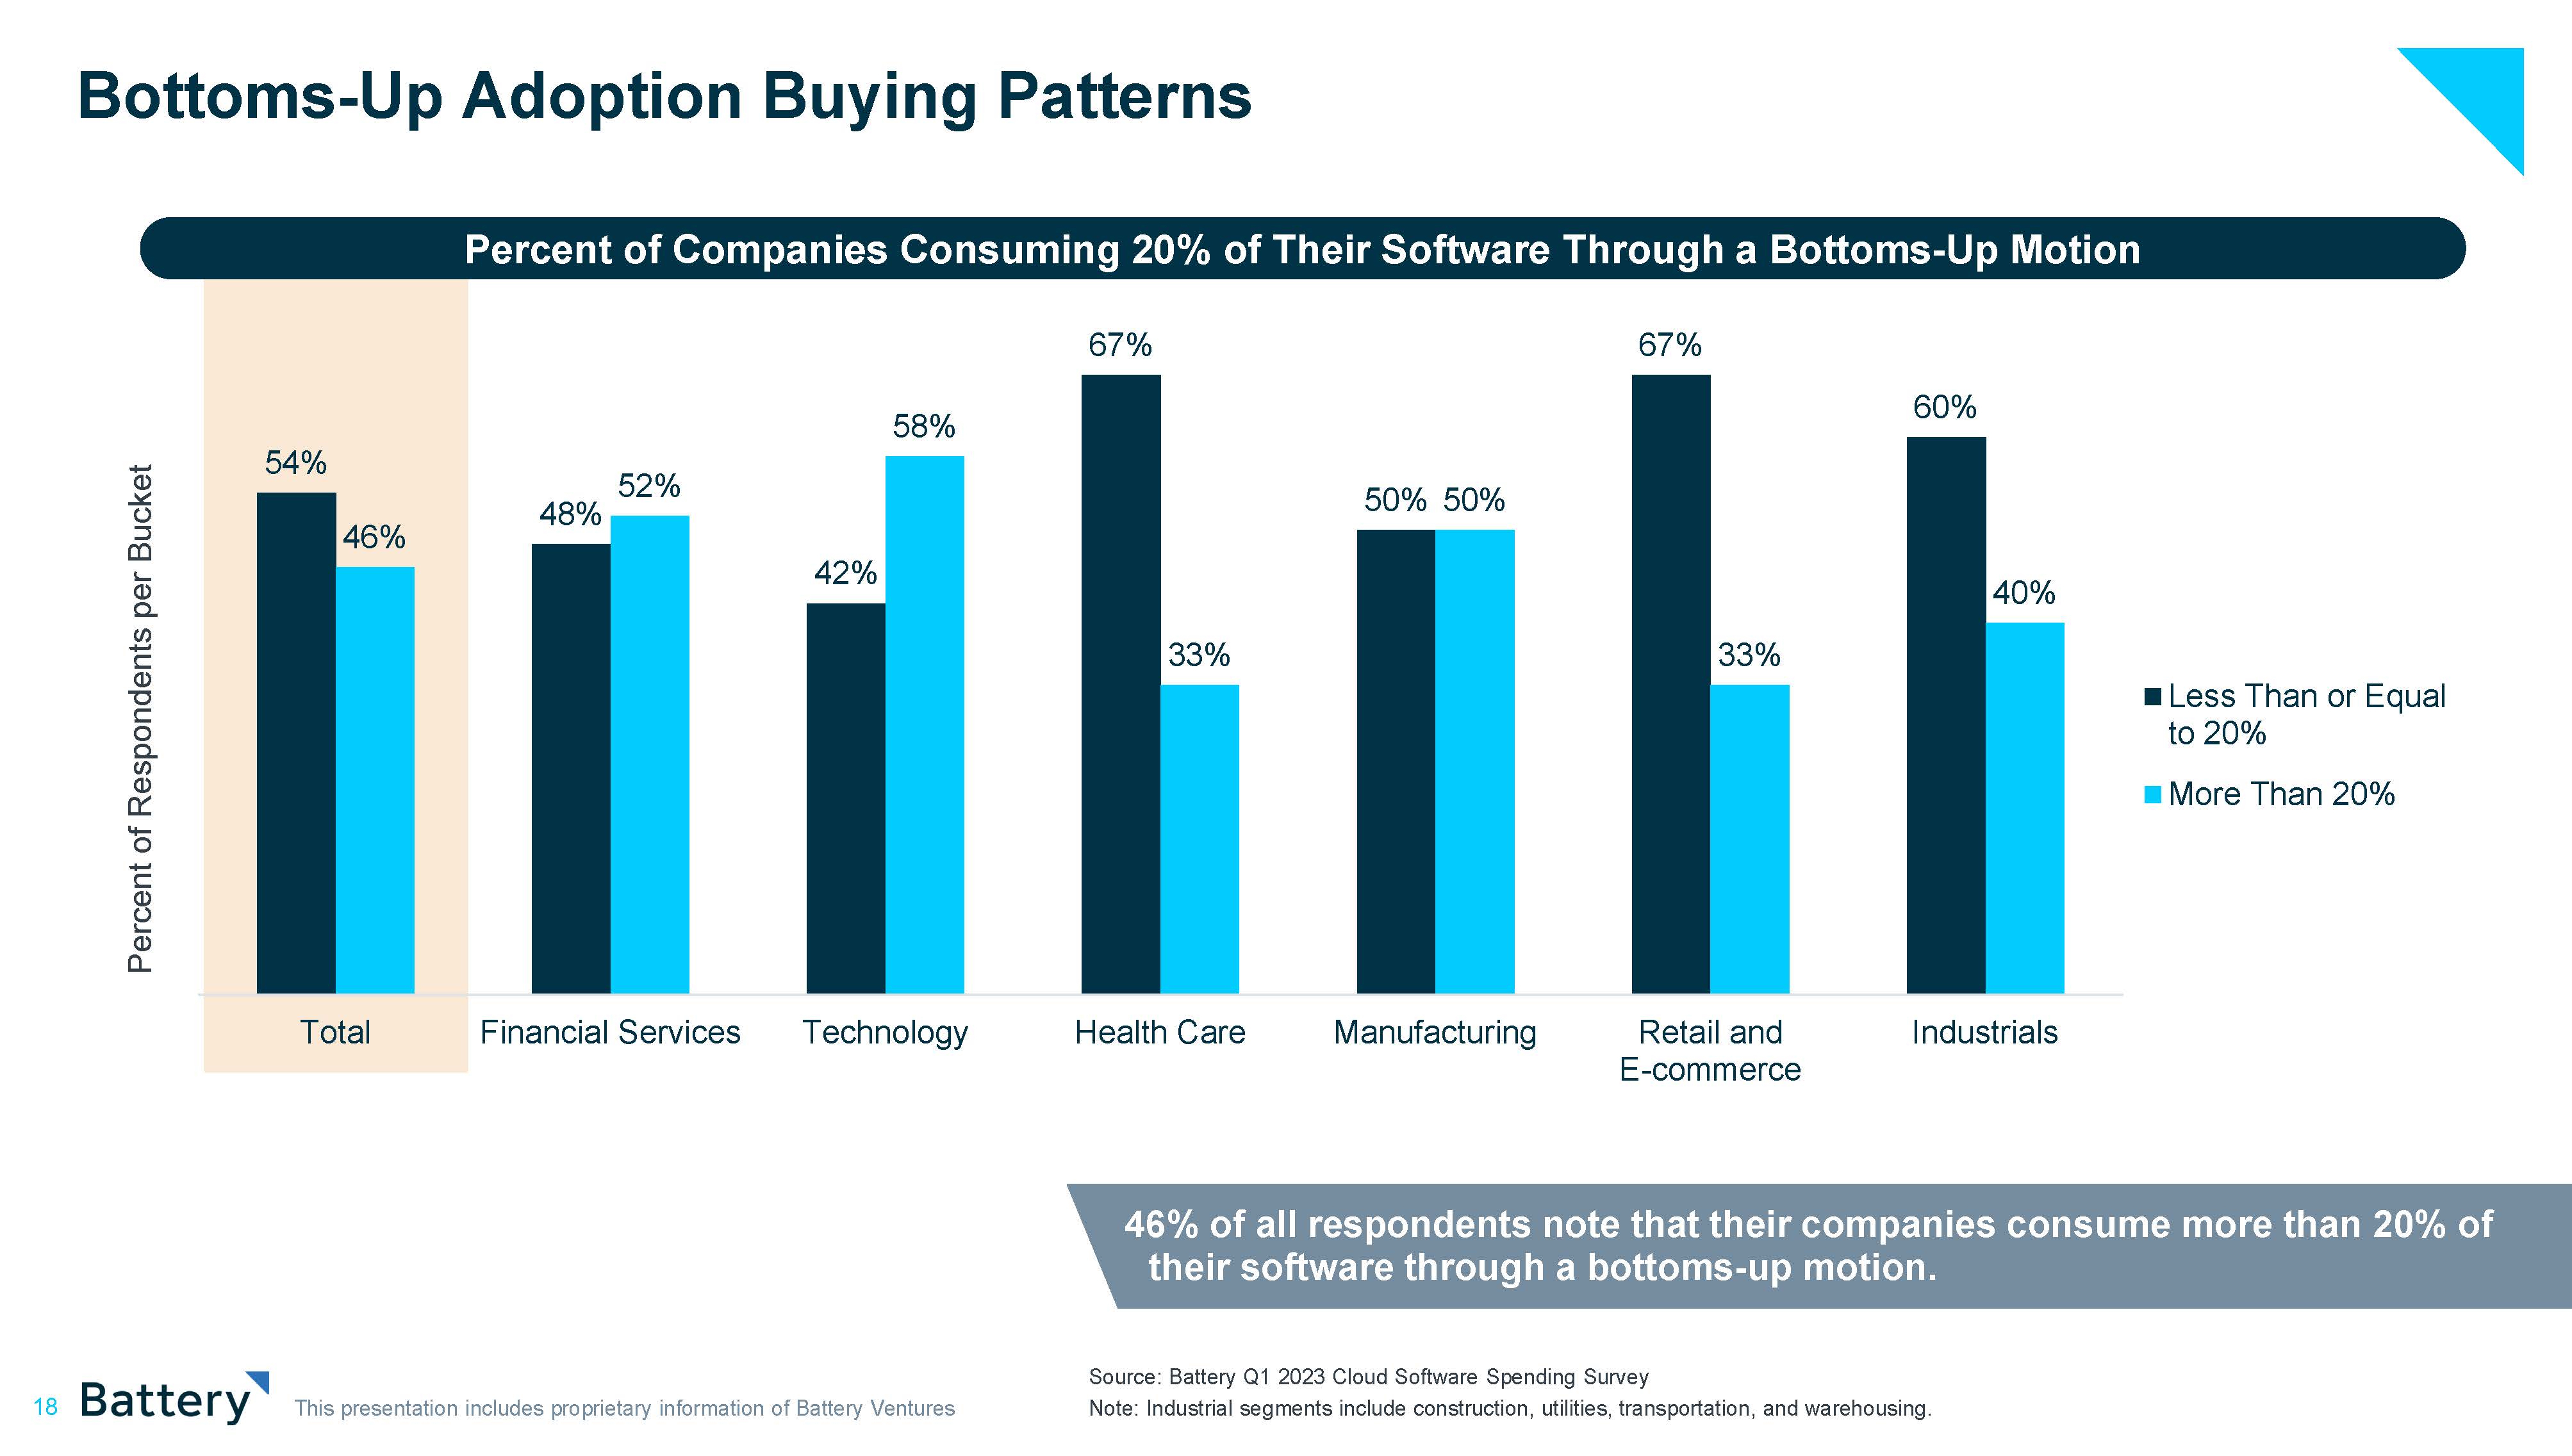 Below is a chart of adoption buying patterns